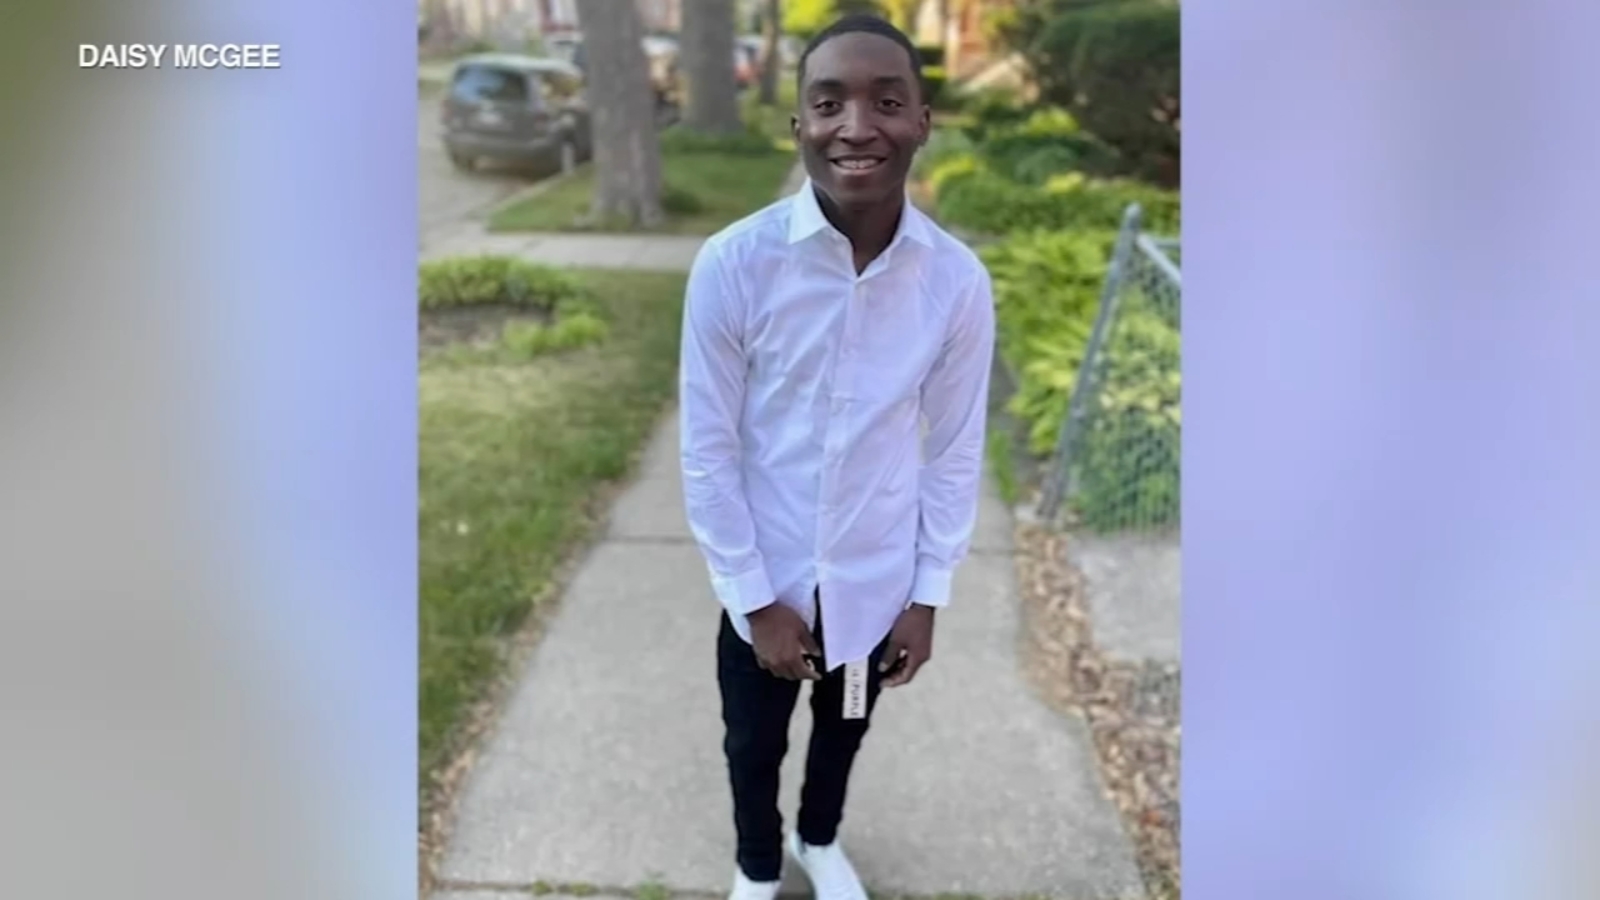 Chicago carjacking Excel Academy student Will McGee shot, killed while